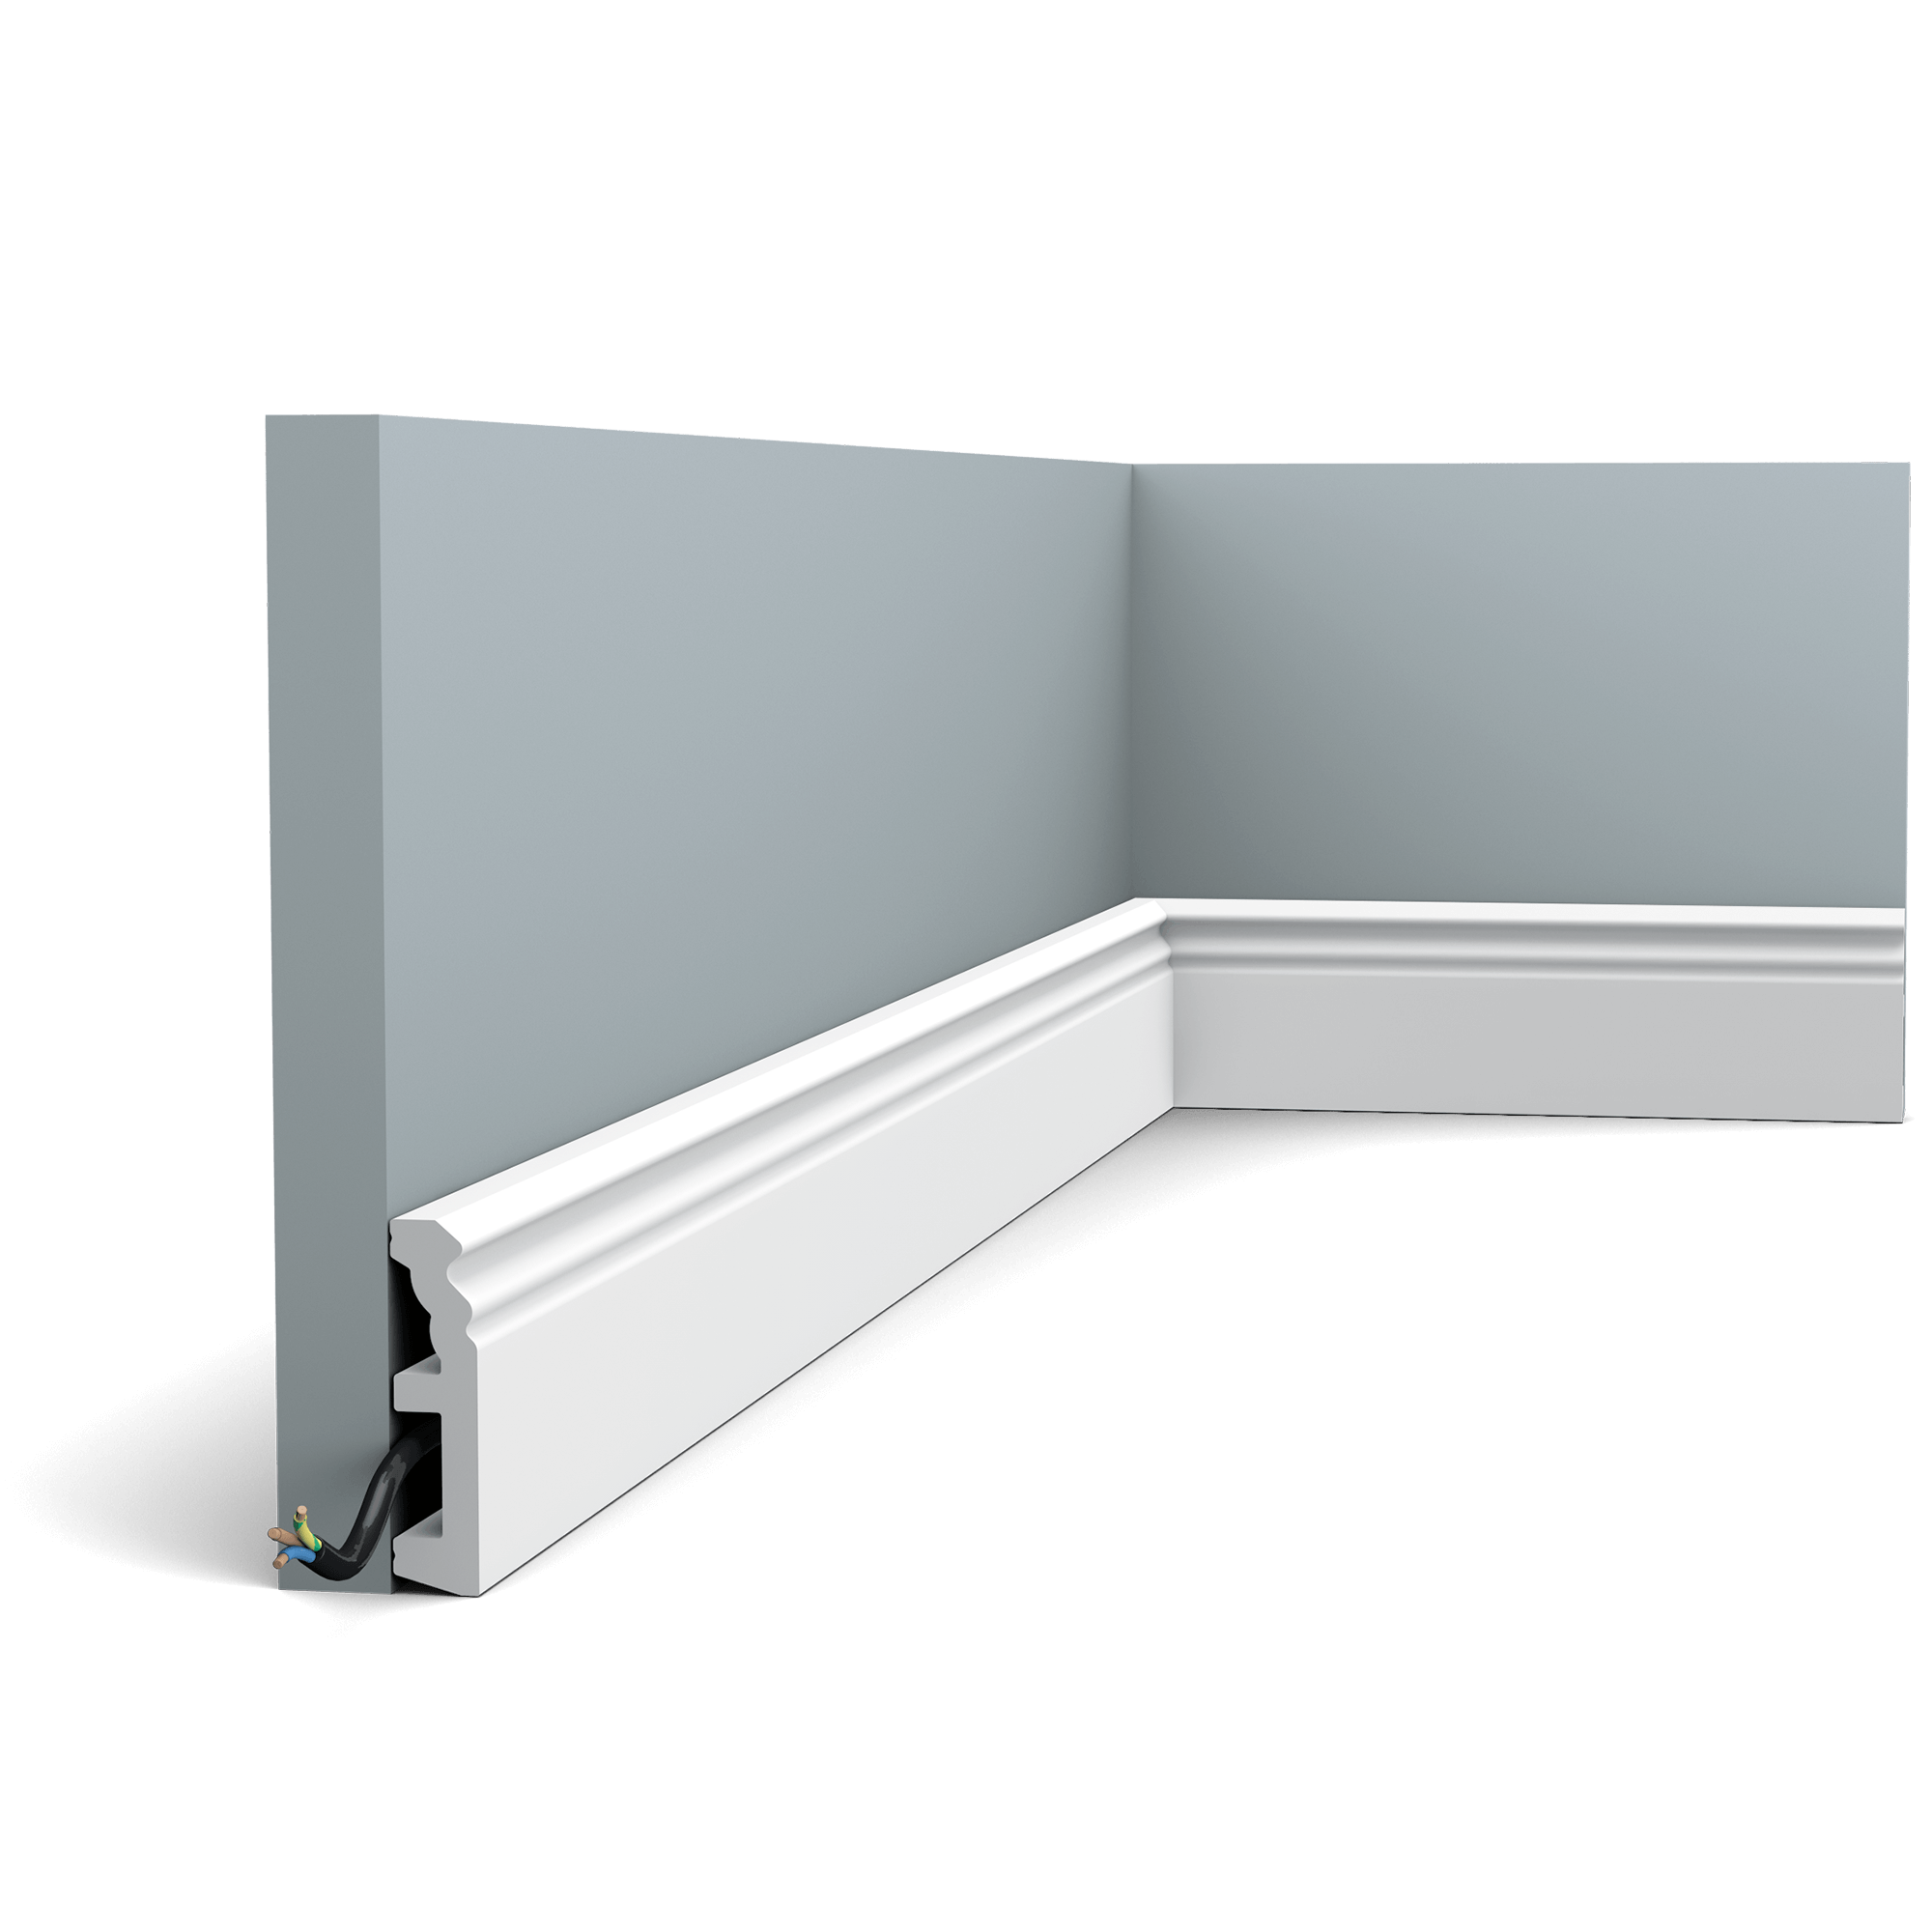 The SX195 HAMBURG is a timeless skirting board. Its unique shape with a rich history provides your wall with an elegant finish.